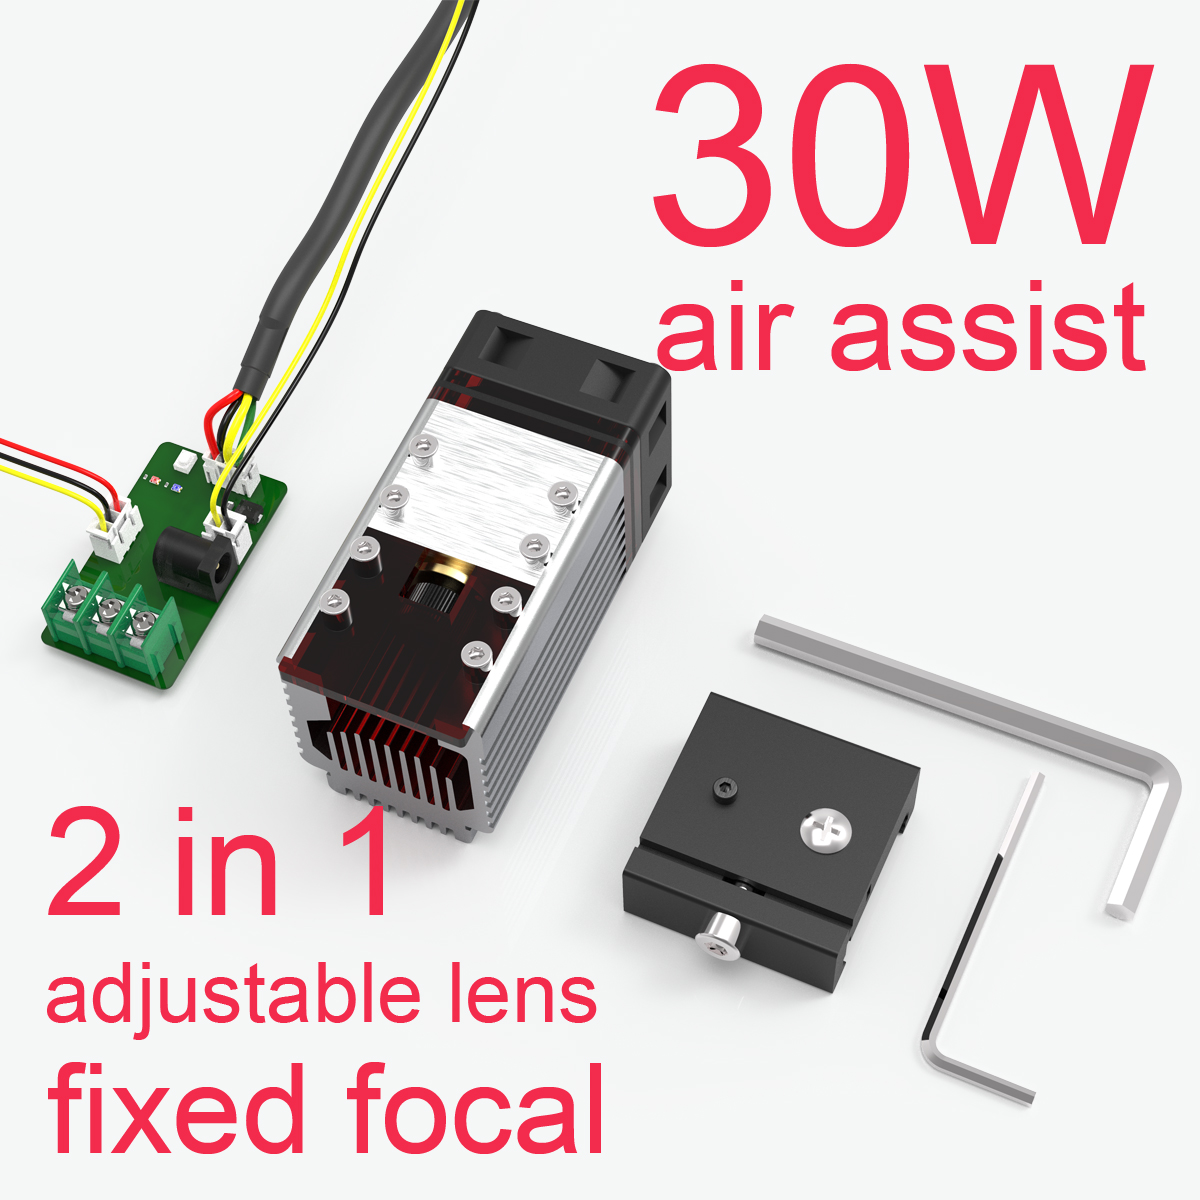 8PcsSet-NEJE-30W-Laser-Module-2-In-1-Adjustable-Variable-Focus-Lens-and-Fixed-Focal-Modified-Laser-A-1758624-1